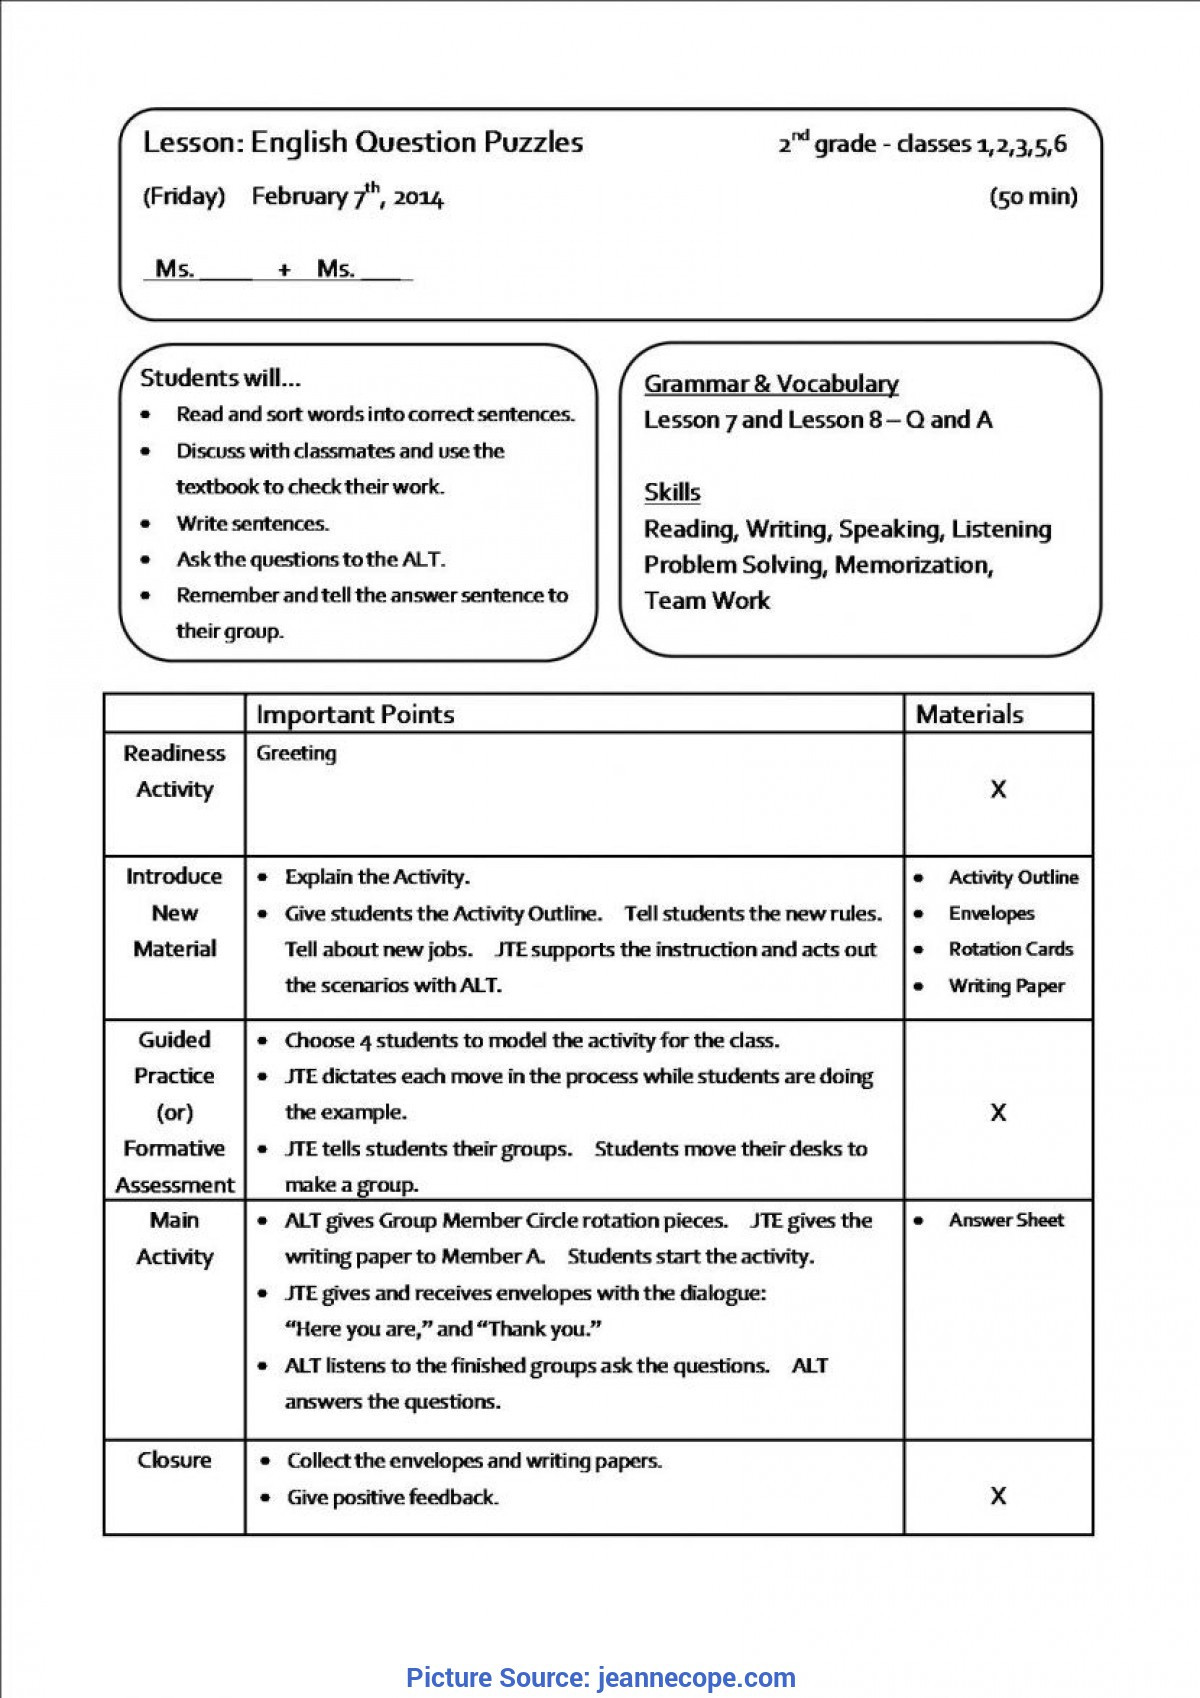 Lesson Plan Definition Special Lesson Plan Definition Diligence Character